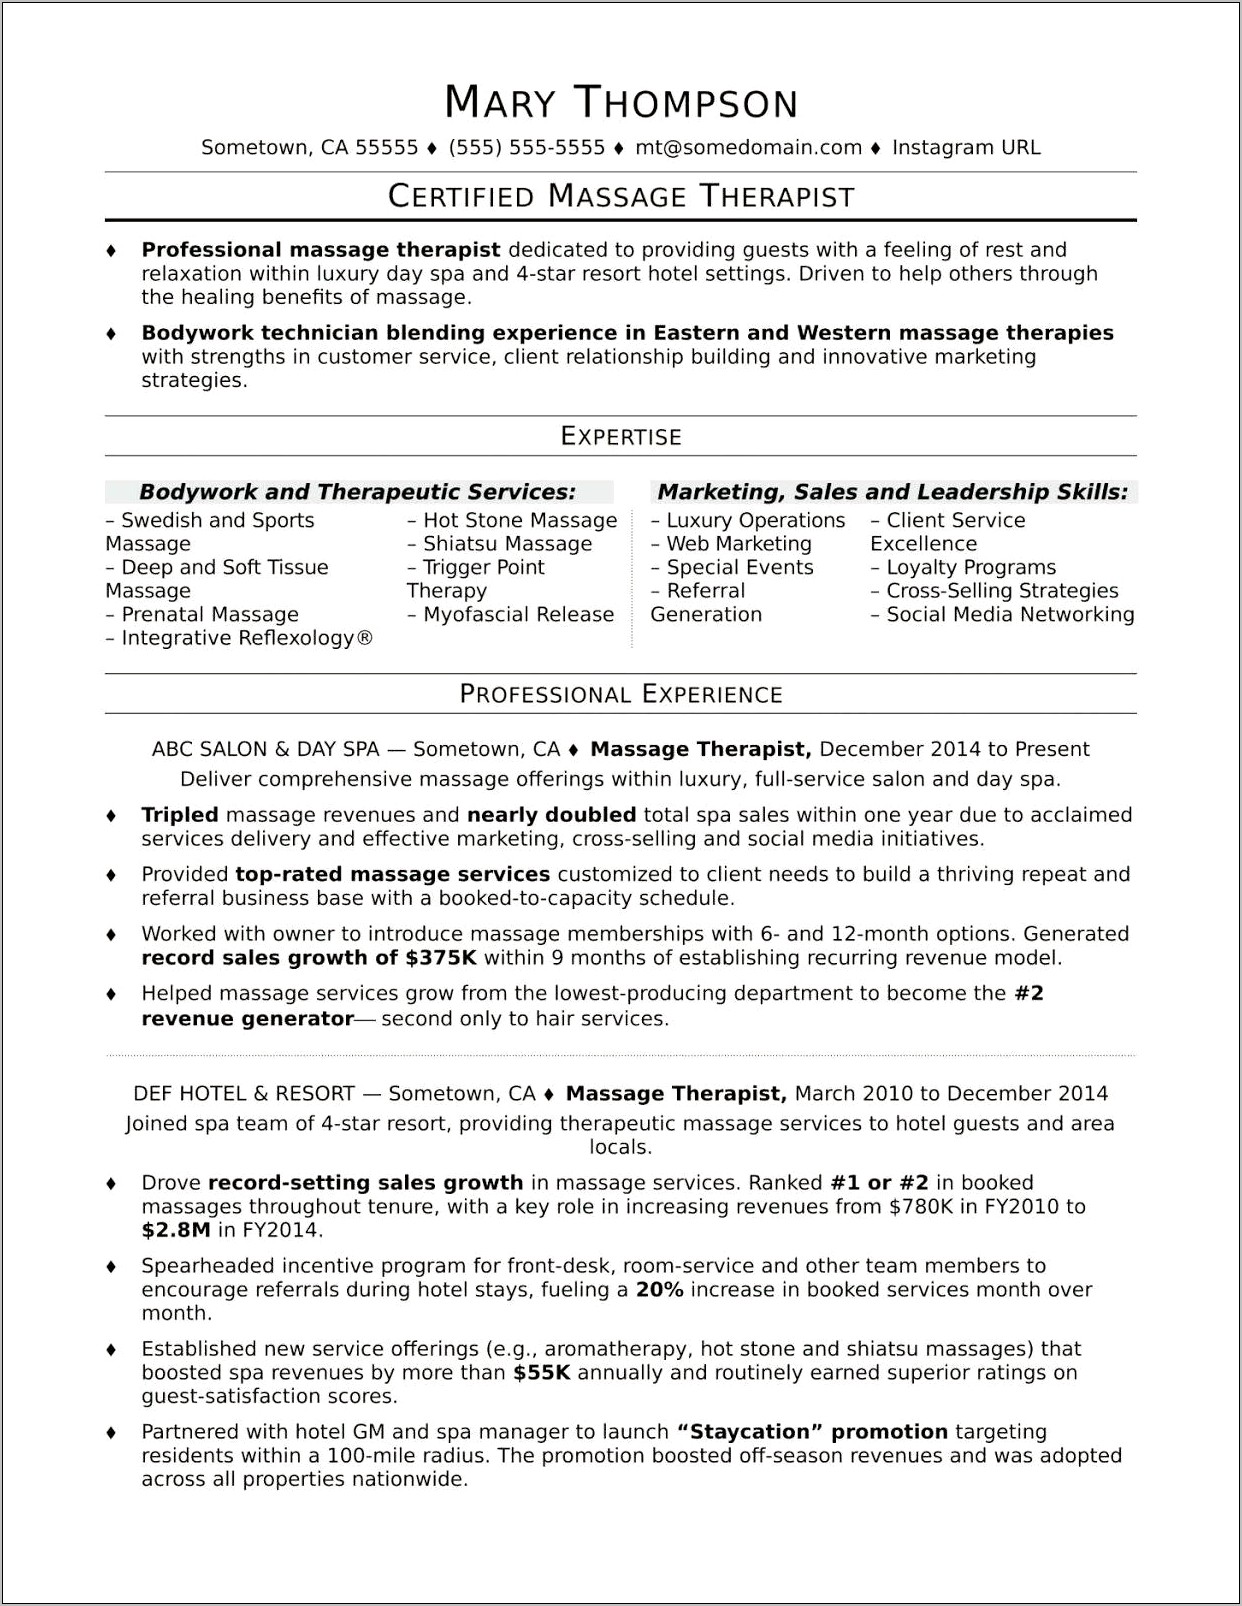 Resume Objective Statement For Benefits Analyst